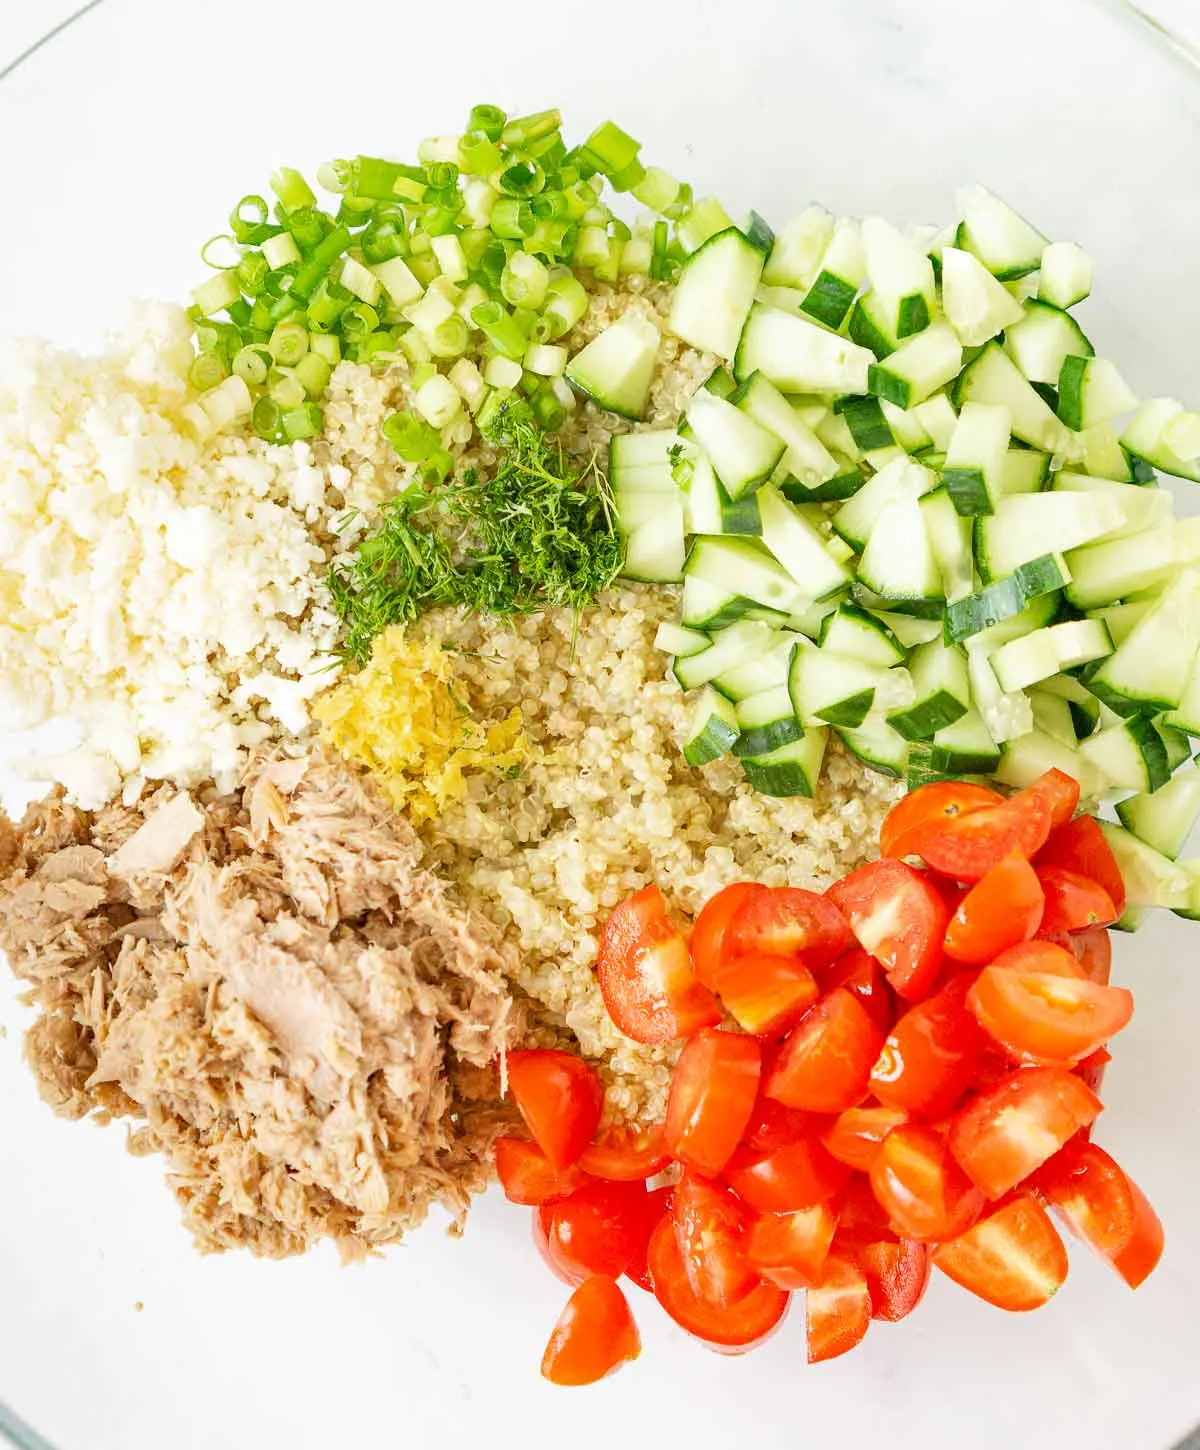 All the ingredients for tuna quinoa salad in a bowl.